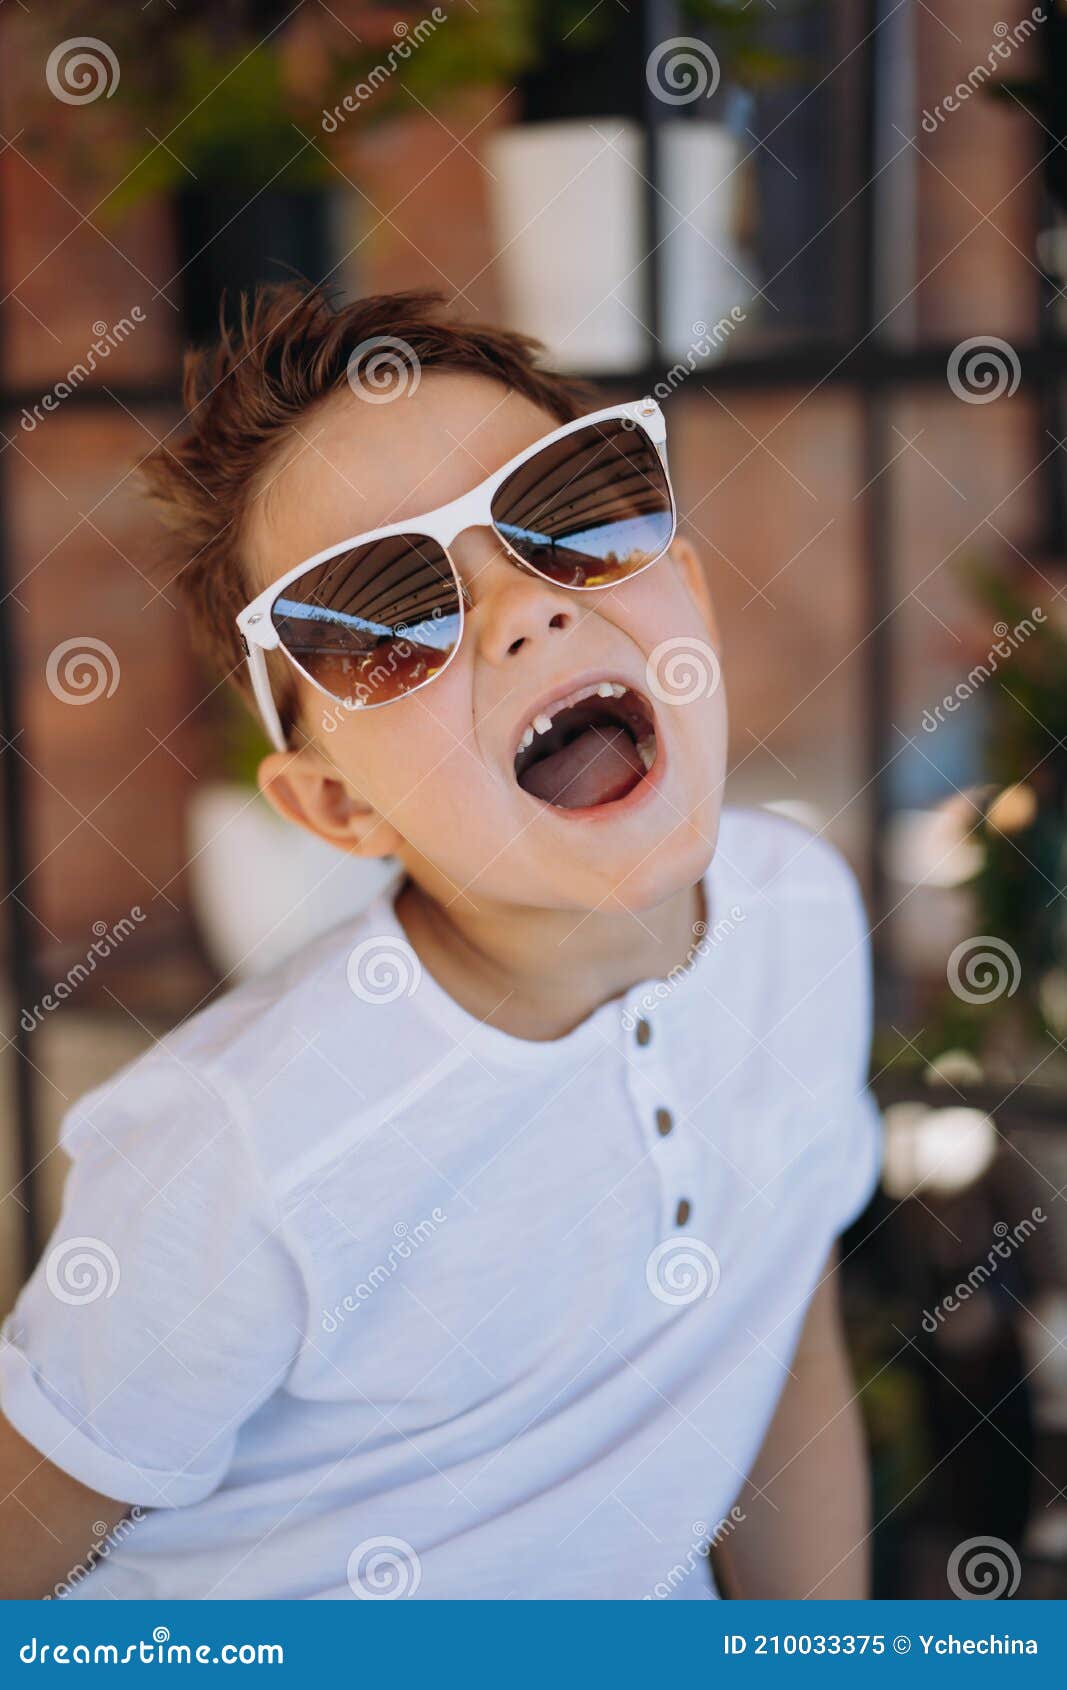 cute cauasian boy in white tee shirt and sunglasses posing for camera and showing his lost tooth.